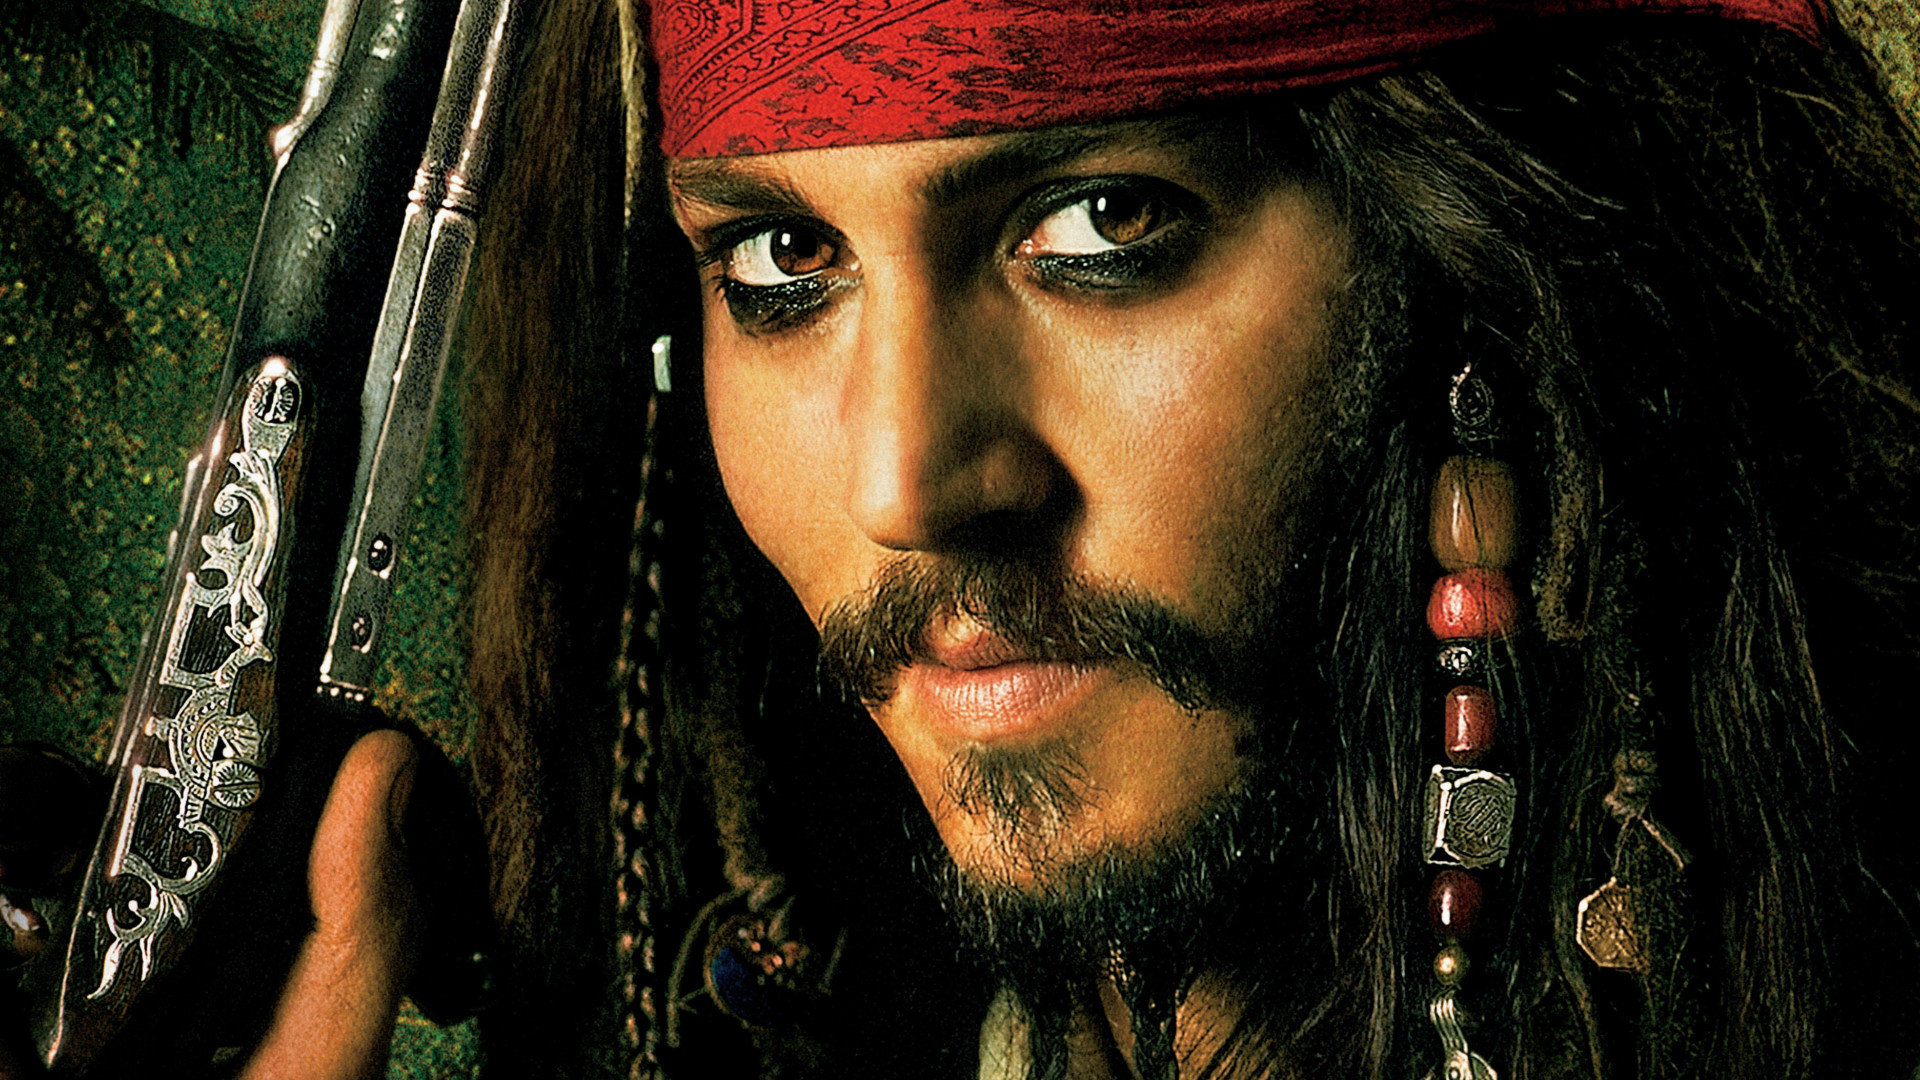  Pirates of the Caribbean On Stranger Tides HD Wallpapers 